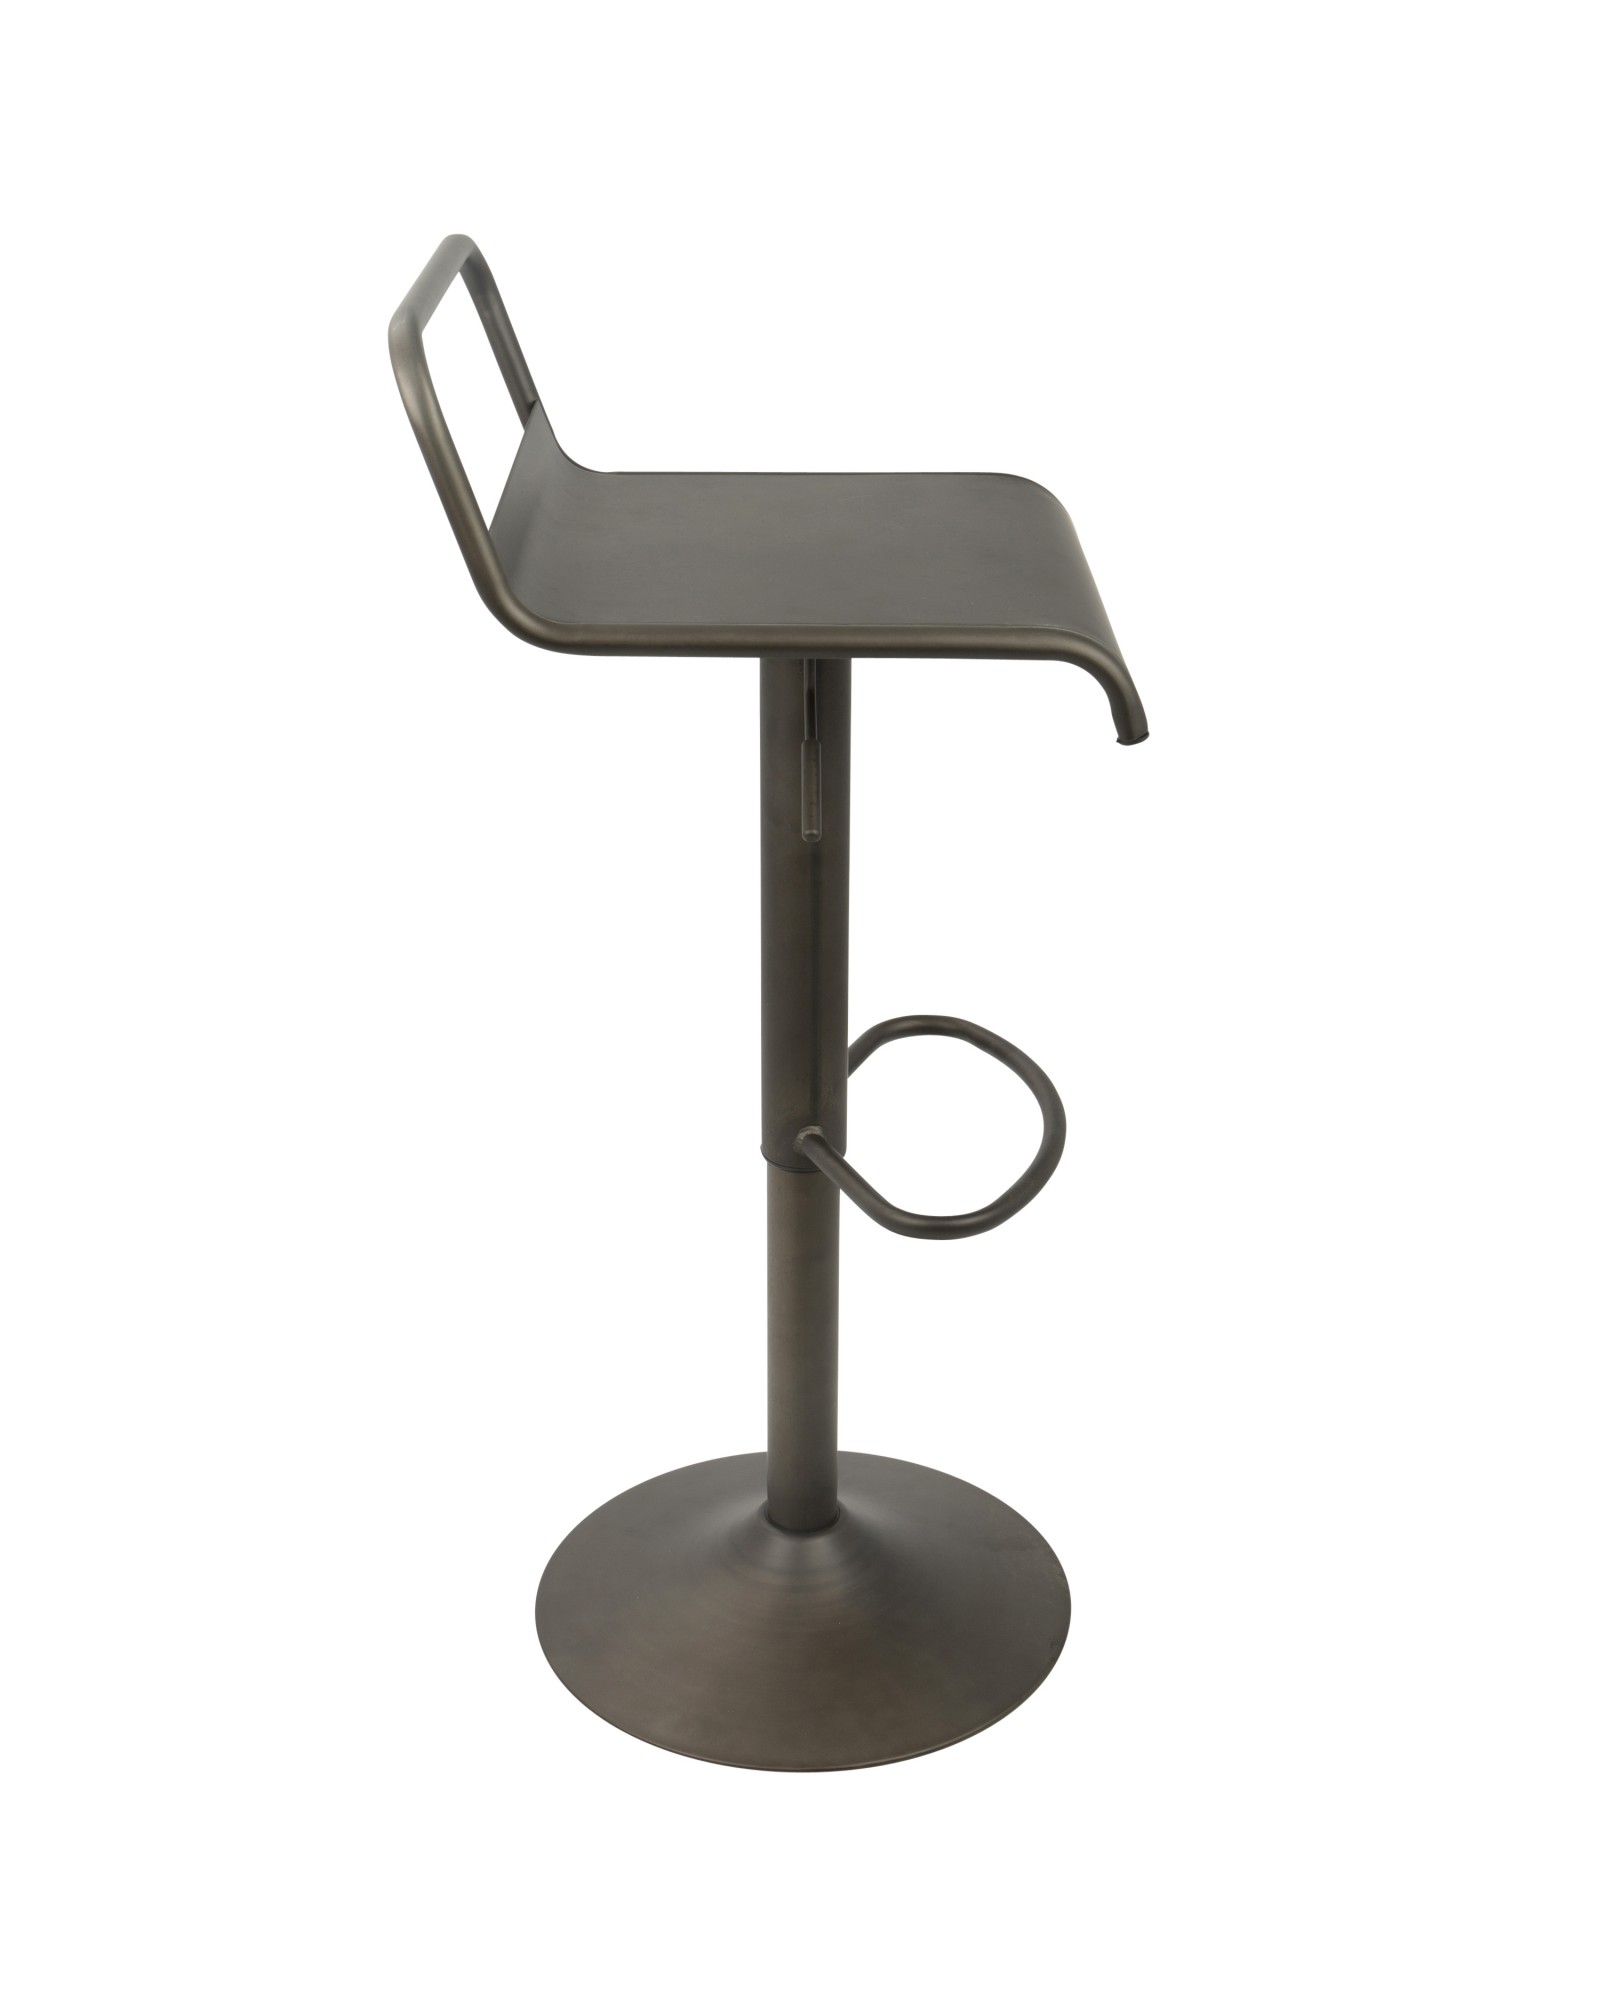 Emery Industrial Adjustable Barstool with Swivel in Antique